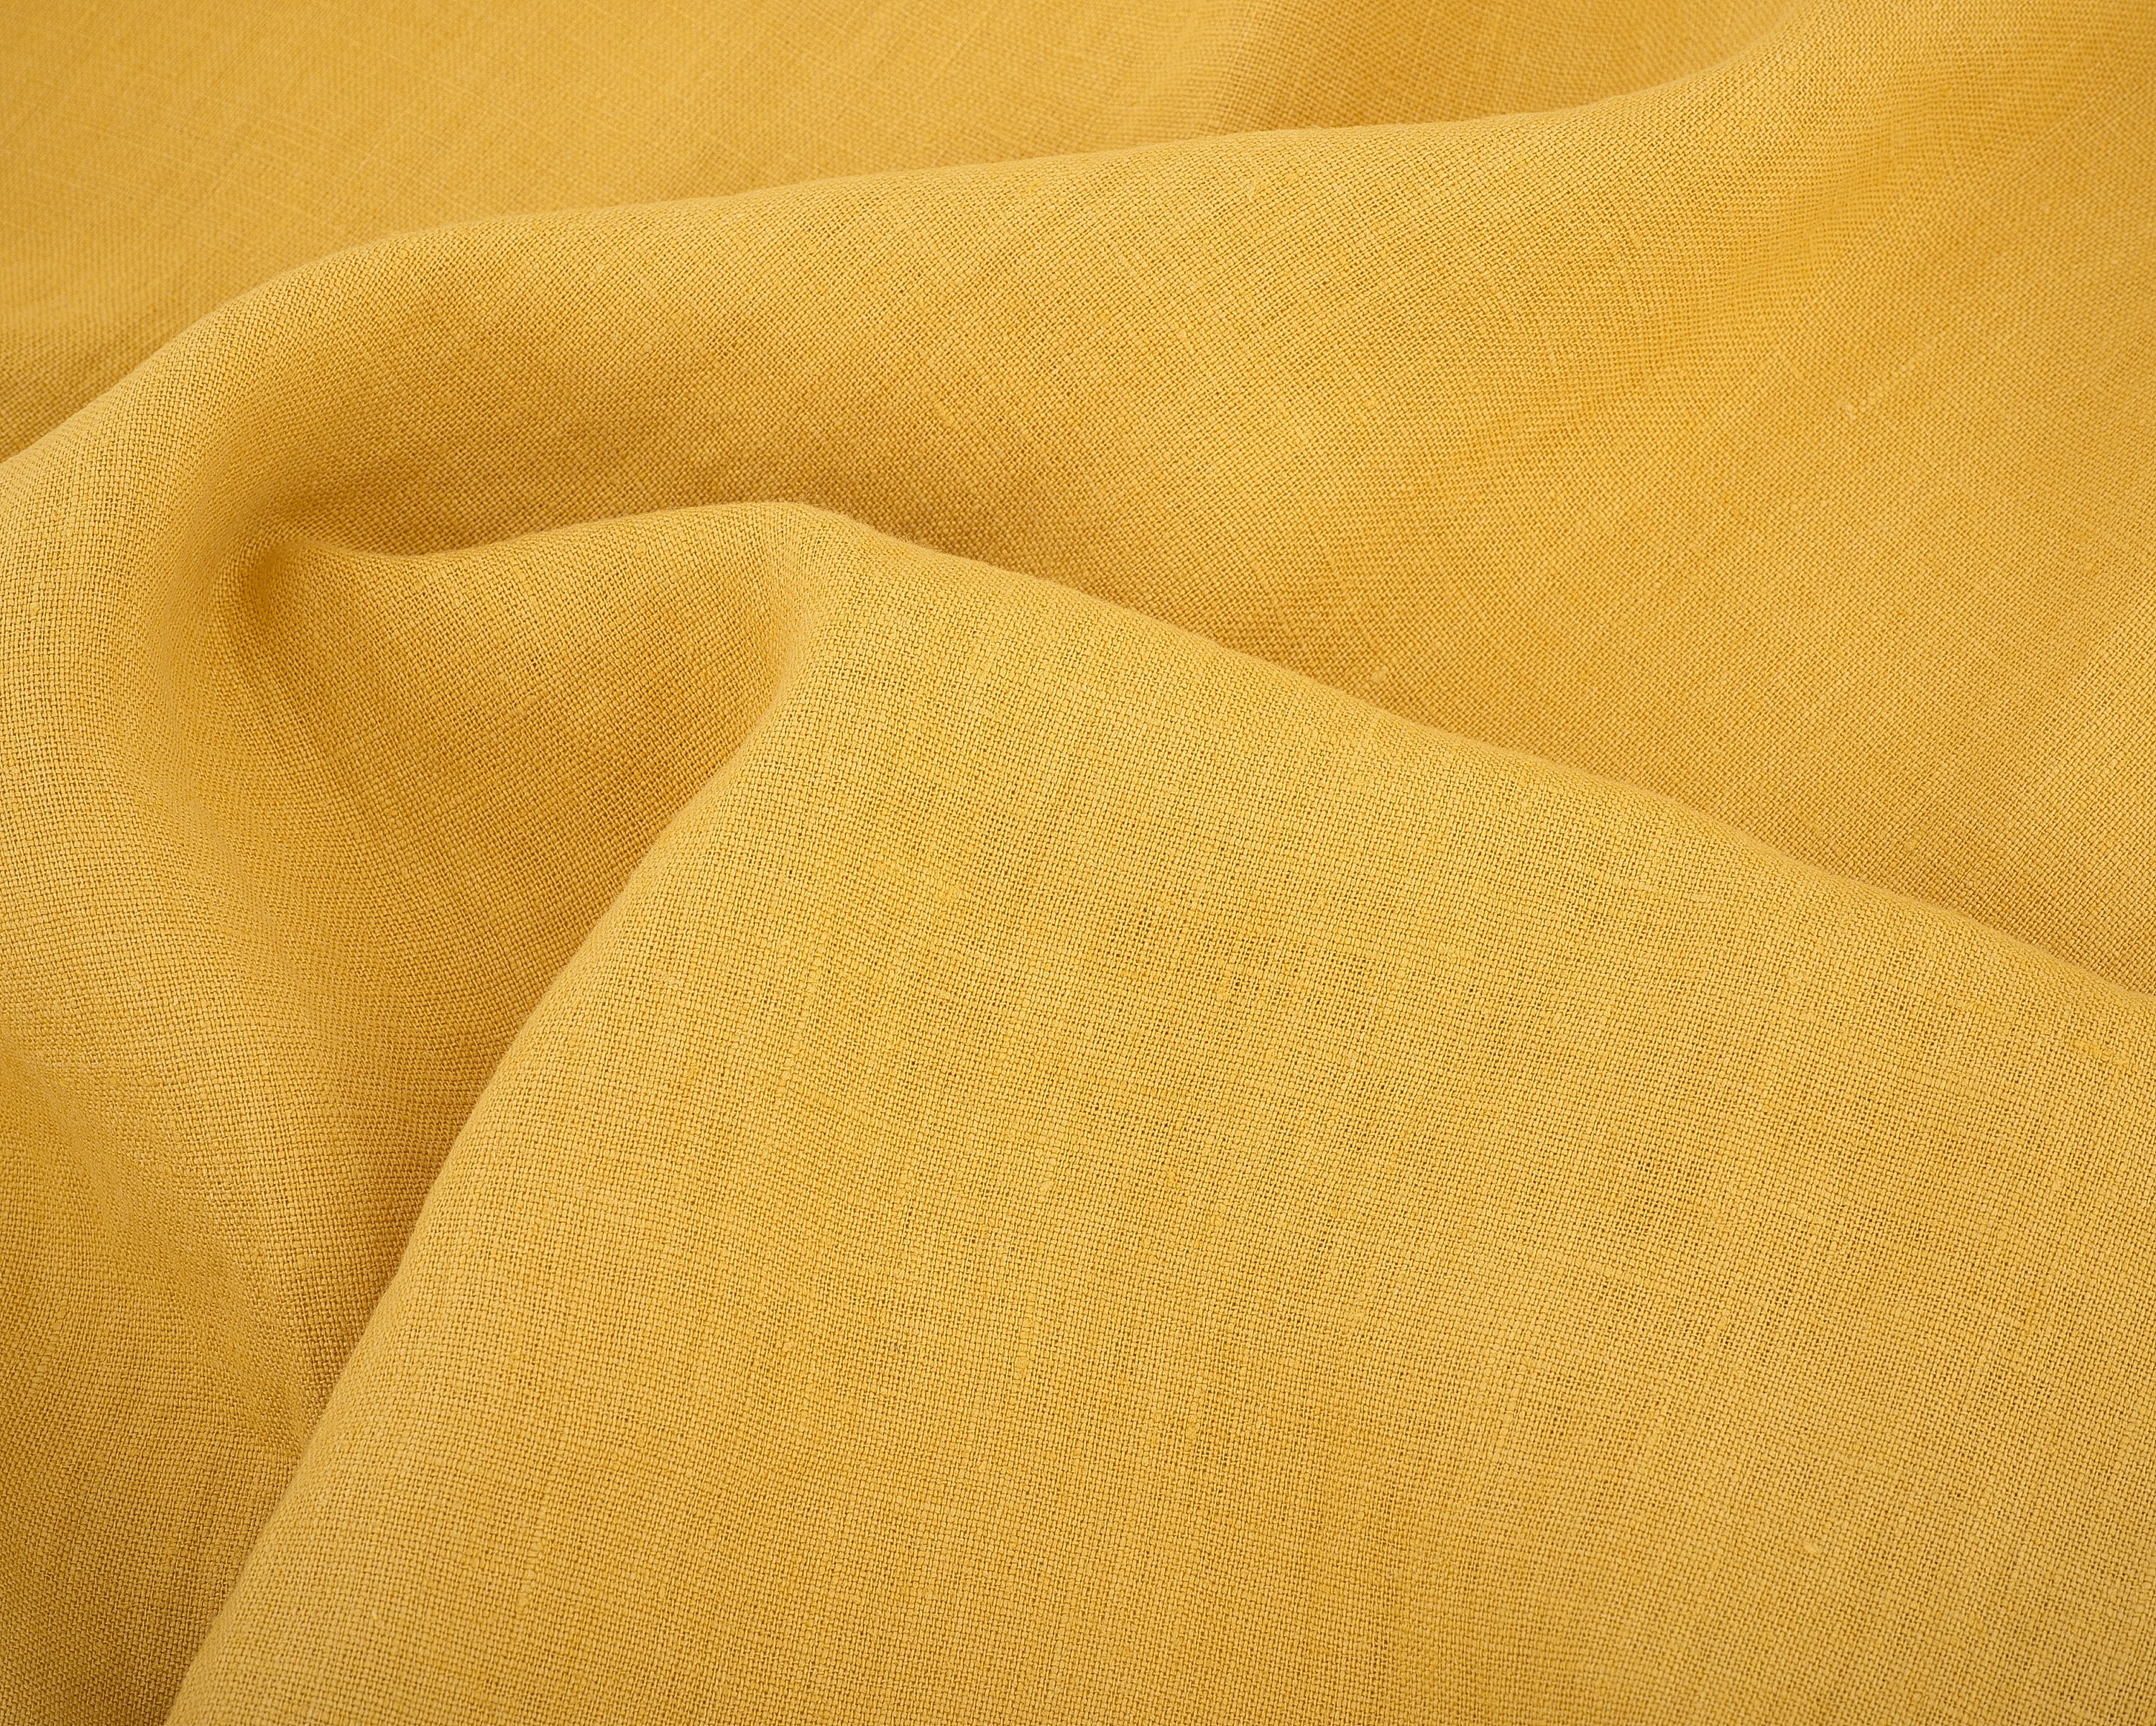 Linen Fabric by the Yard or Meter. Golden Yellow Linen Fabric for Sewing  Clothes,curtains, Table Linen. Natural,soft,home Textiles Fabric. 